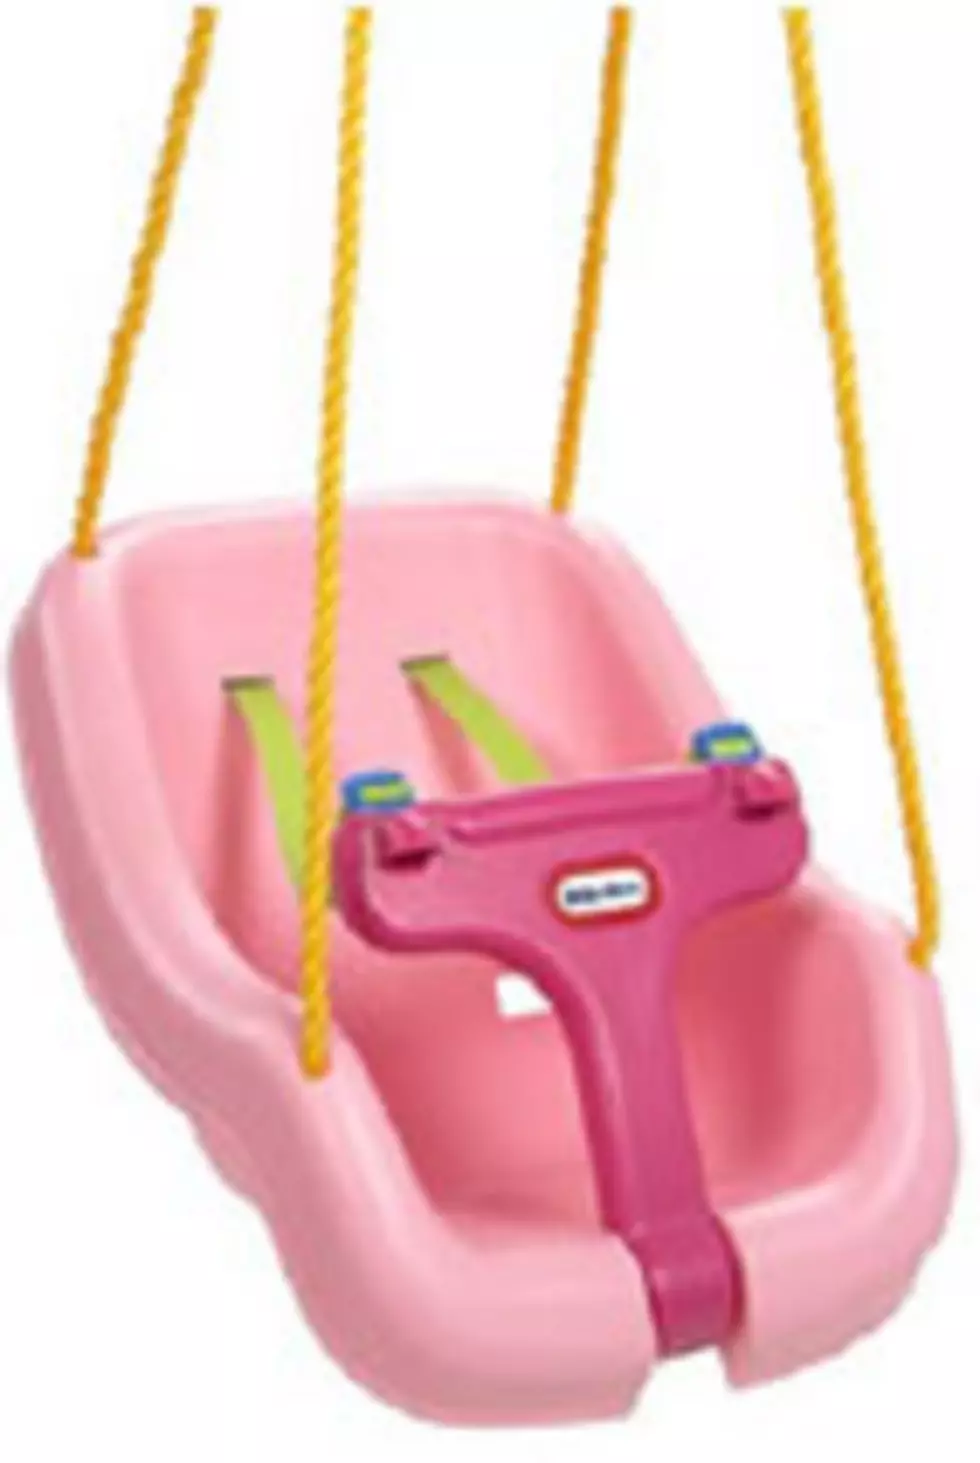 Rockford Parents, If You Have This Swing Get Rid Of It Now